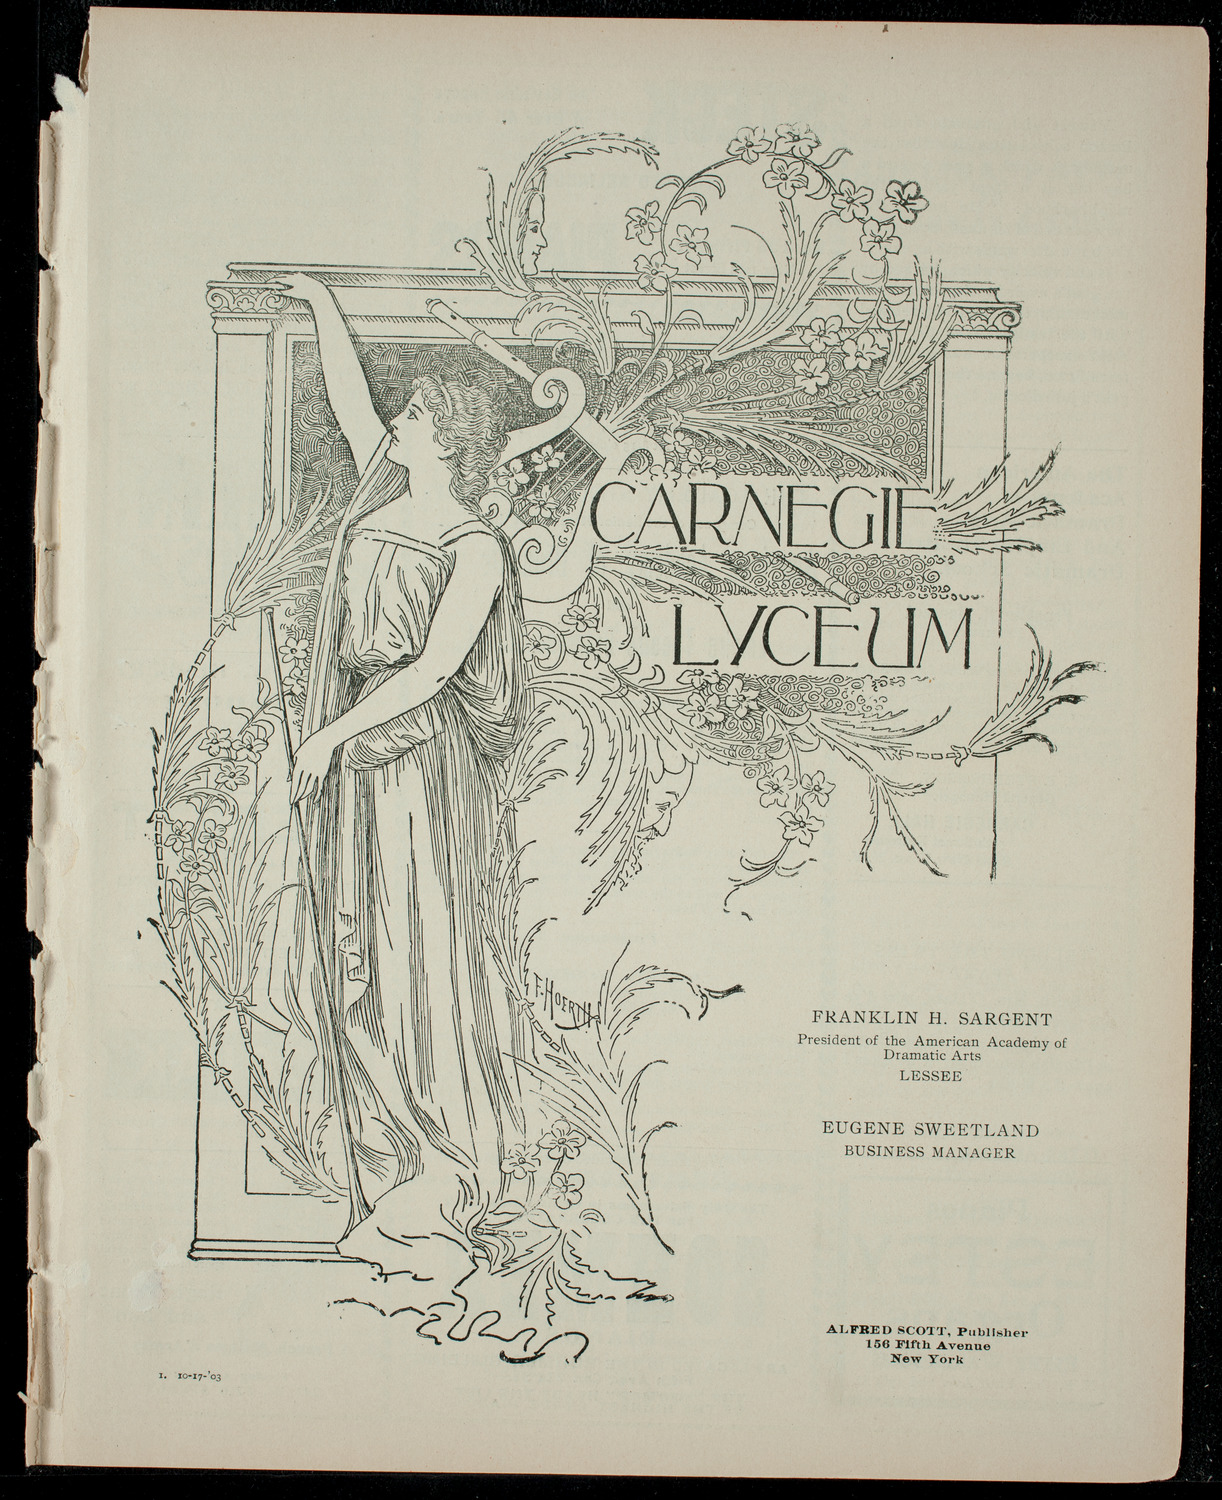 Academy Stock Company of the American Academy of Dramatic Arts and Empire Theatre Dramatic School, October 17, 1903, program page 1